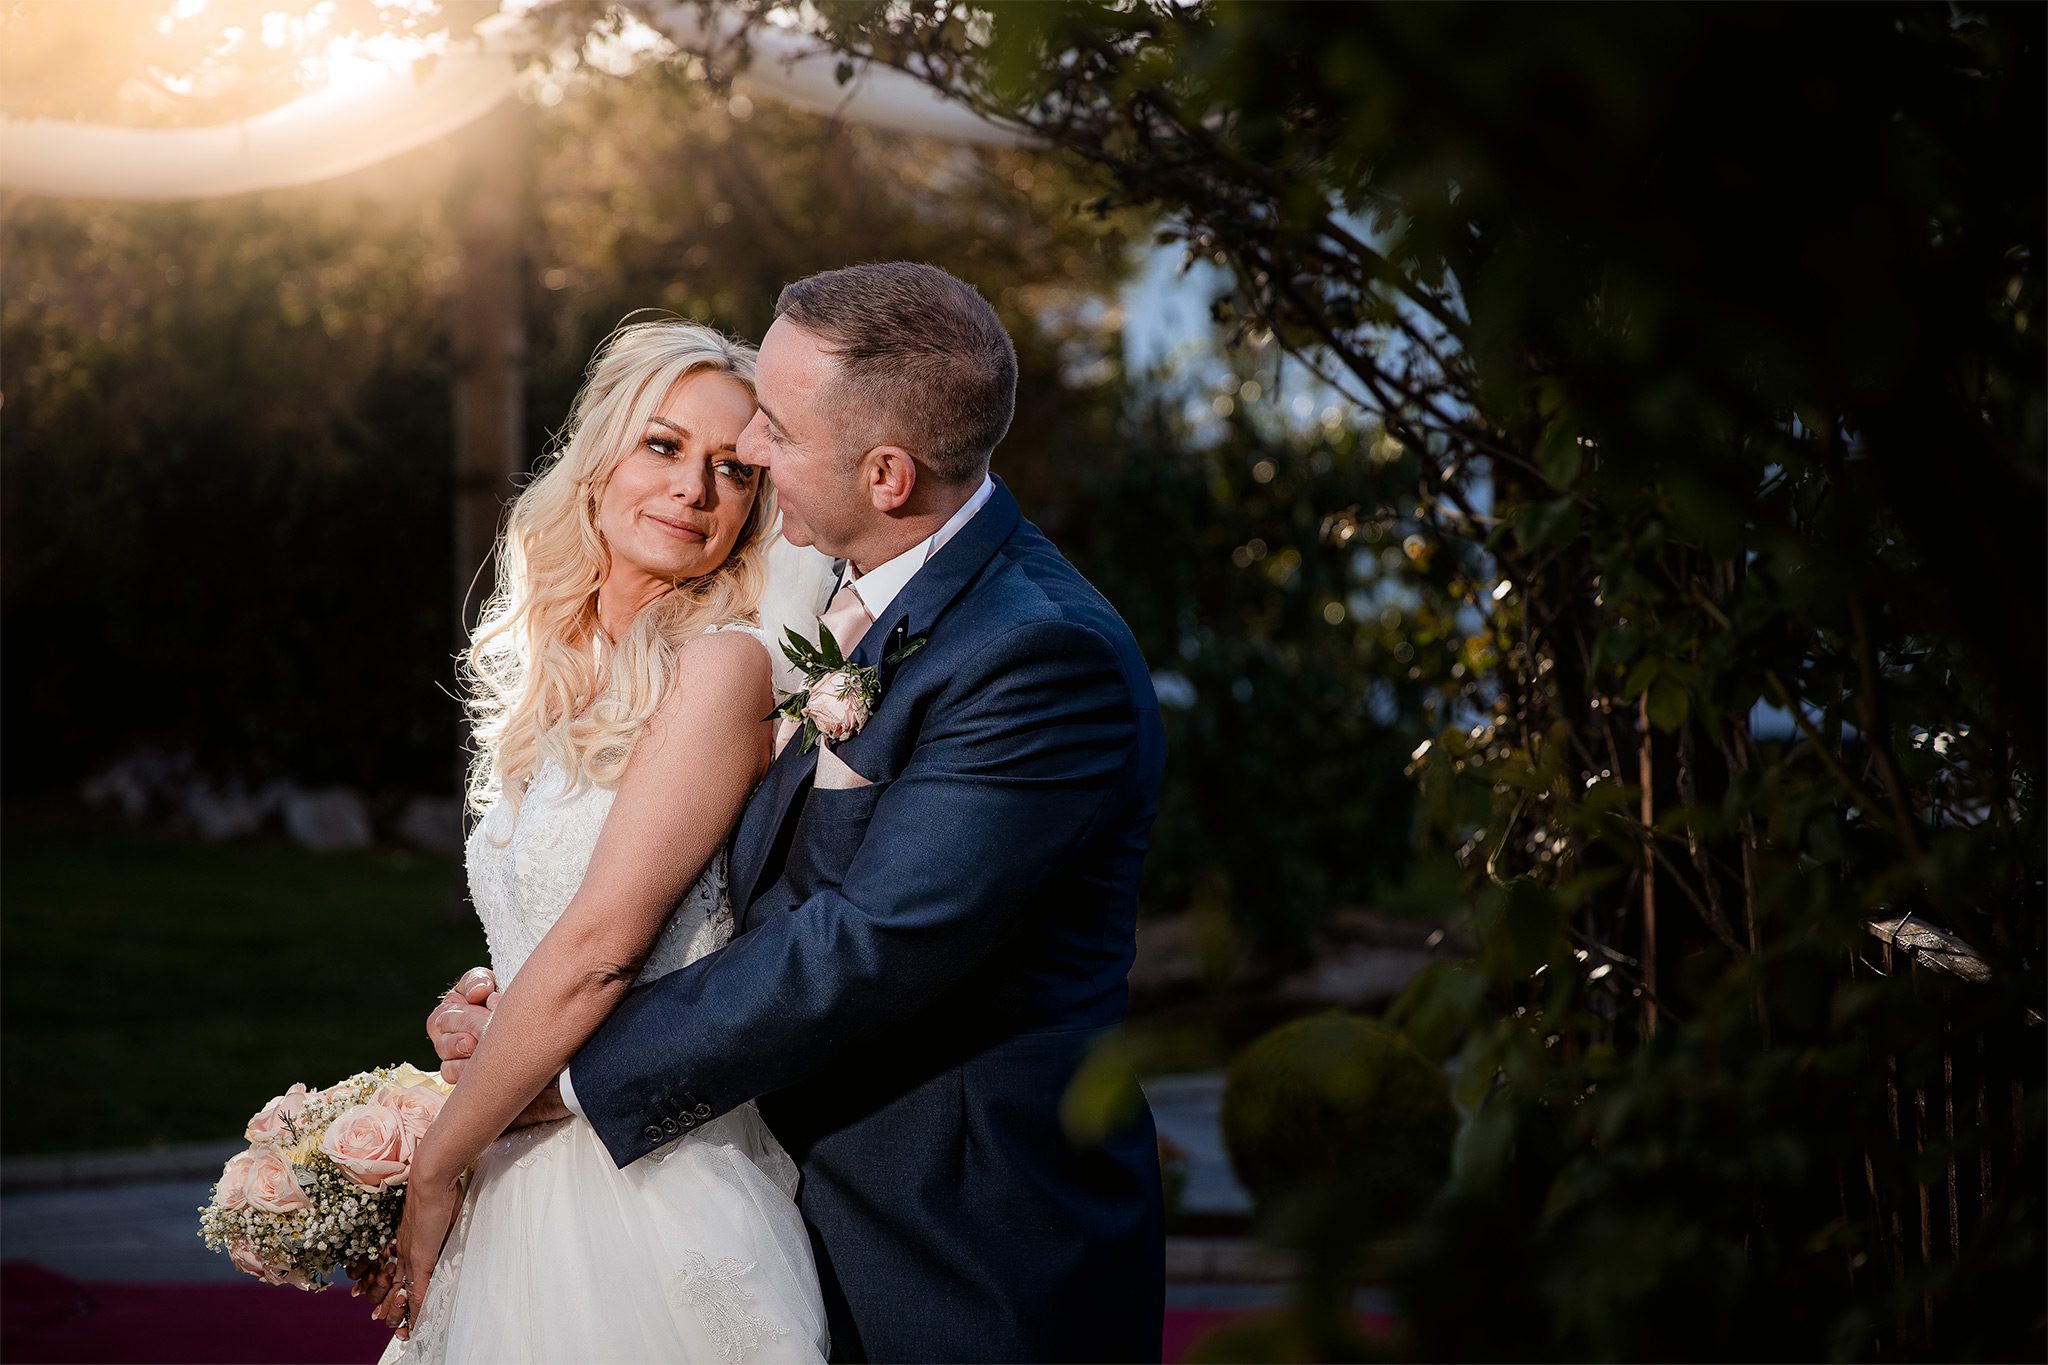 Couple at golden hour during their wedding